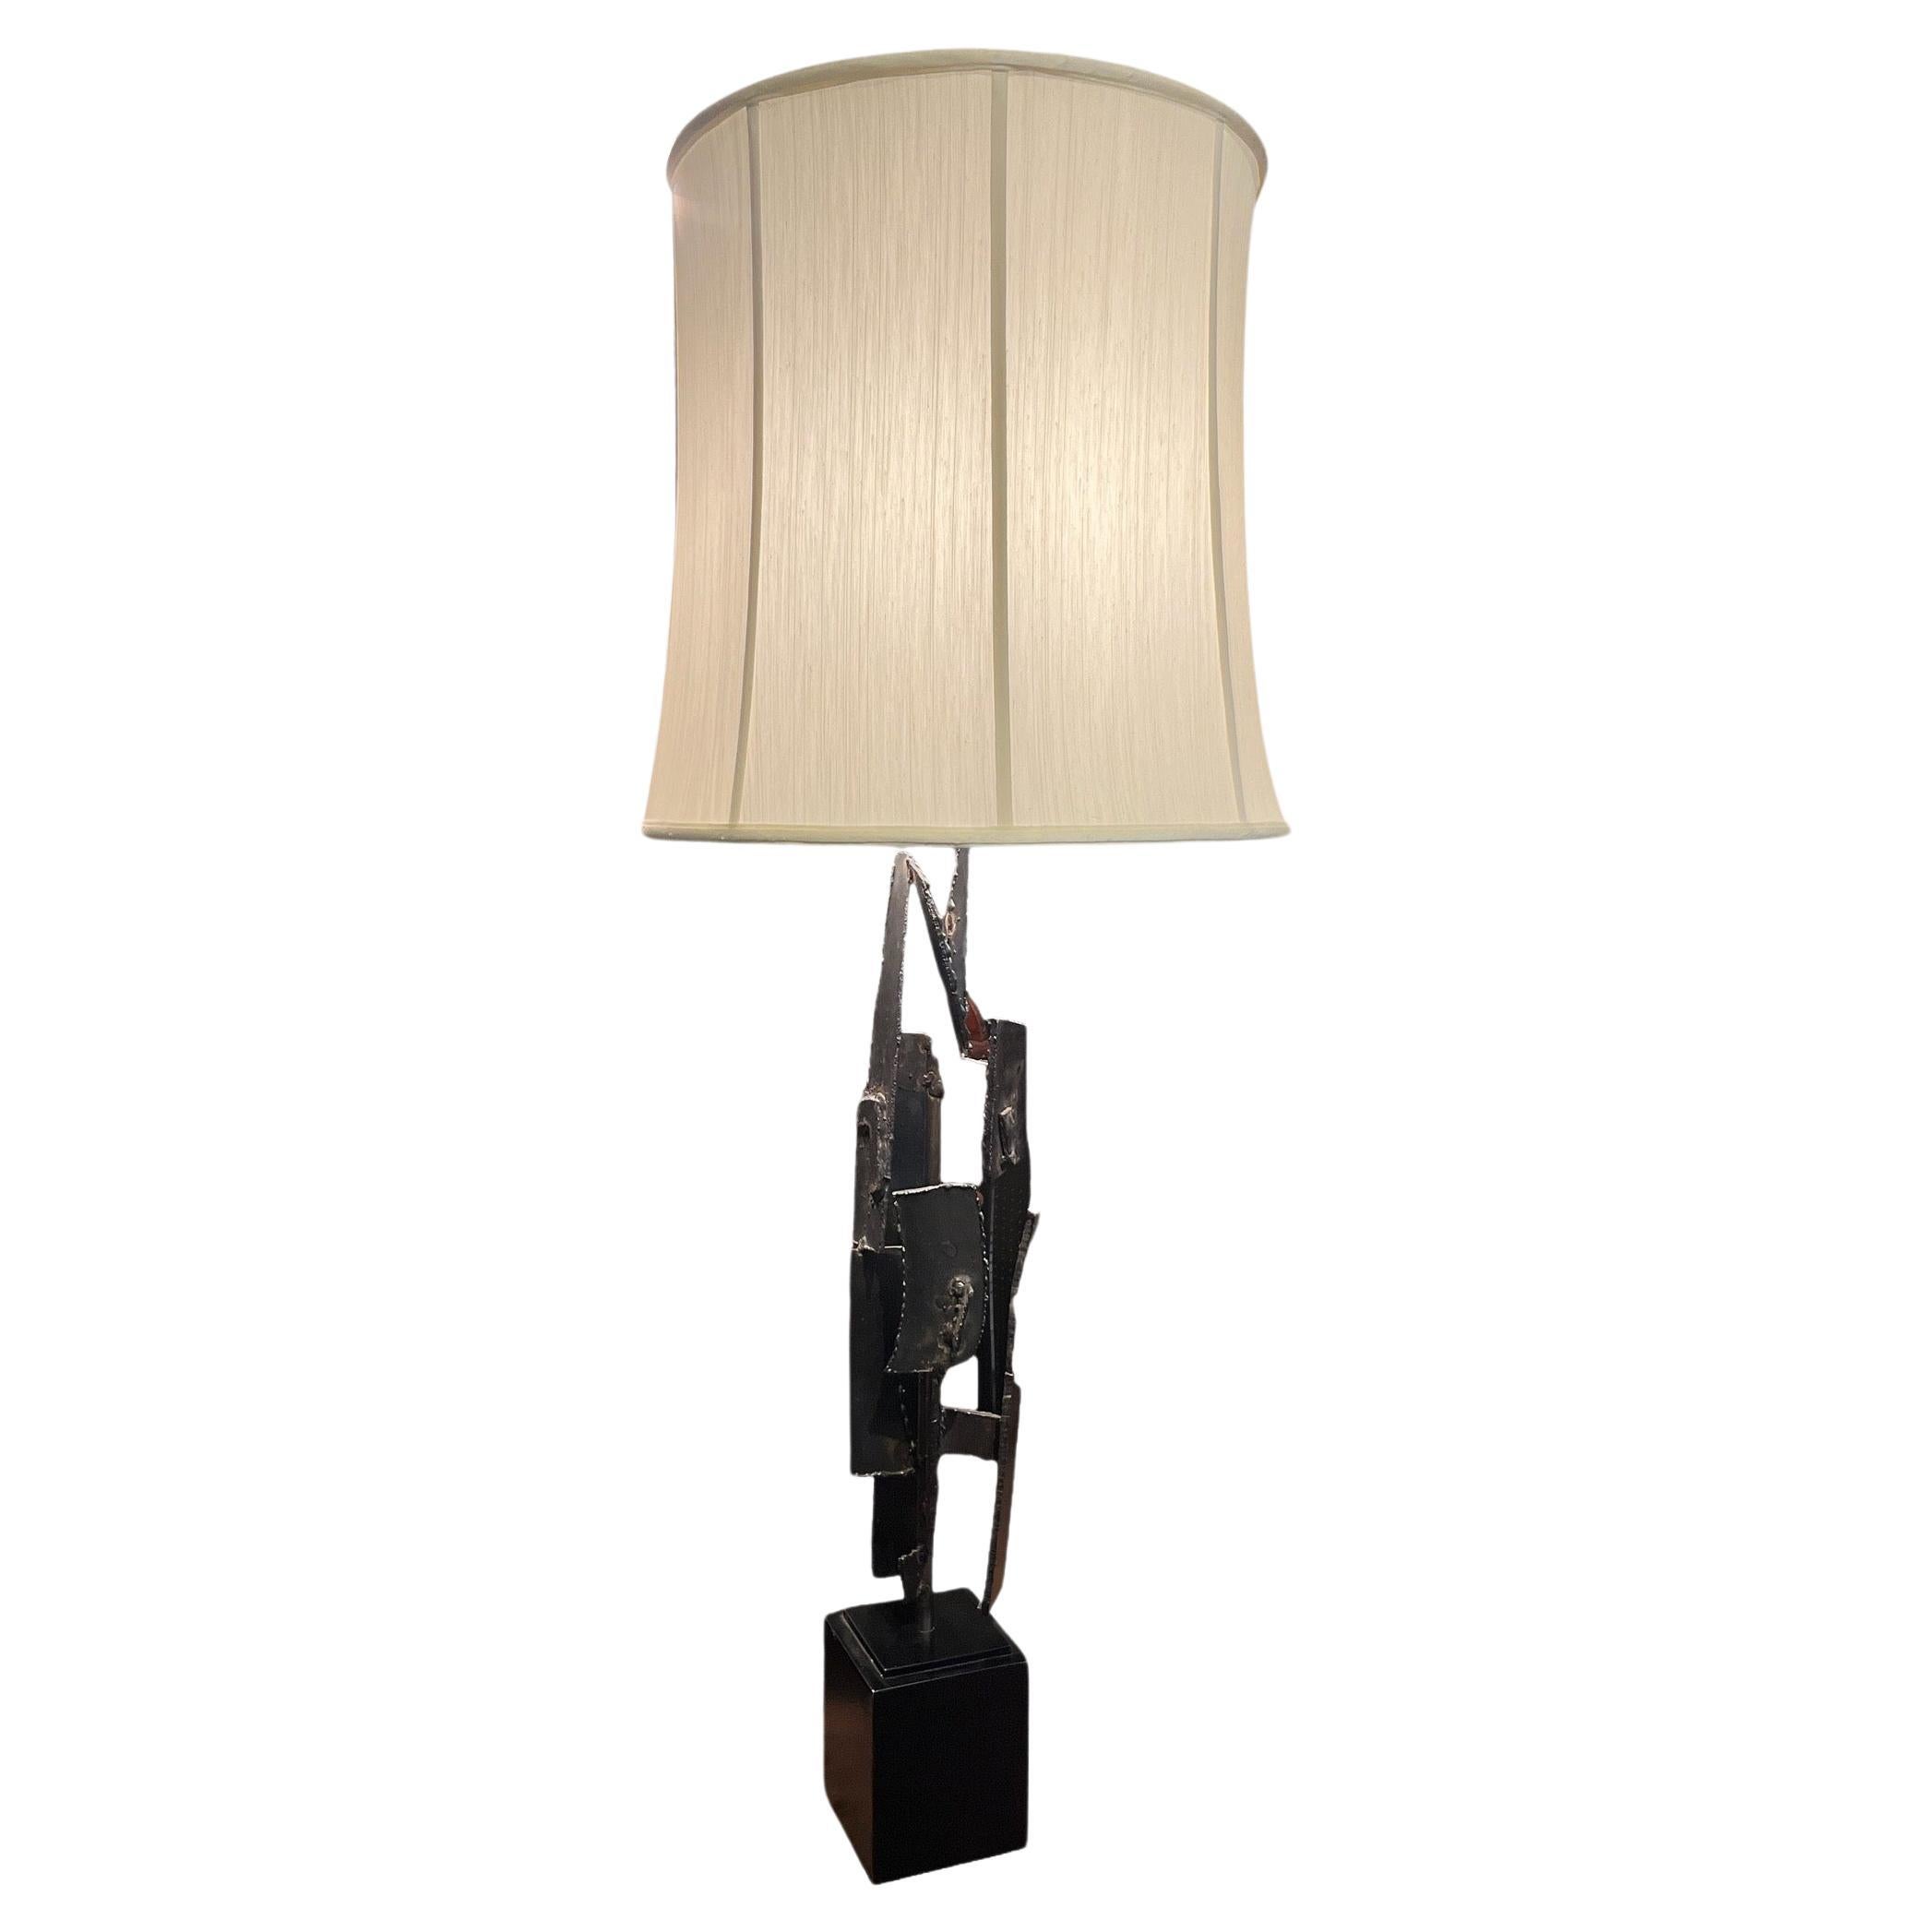 American Mid-Century Modern Brutalist Lamp by Richard Barr for Laurel Lamp Company C.1970 For Sale